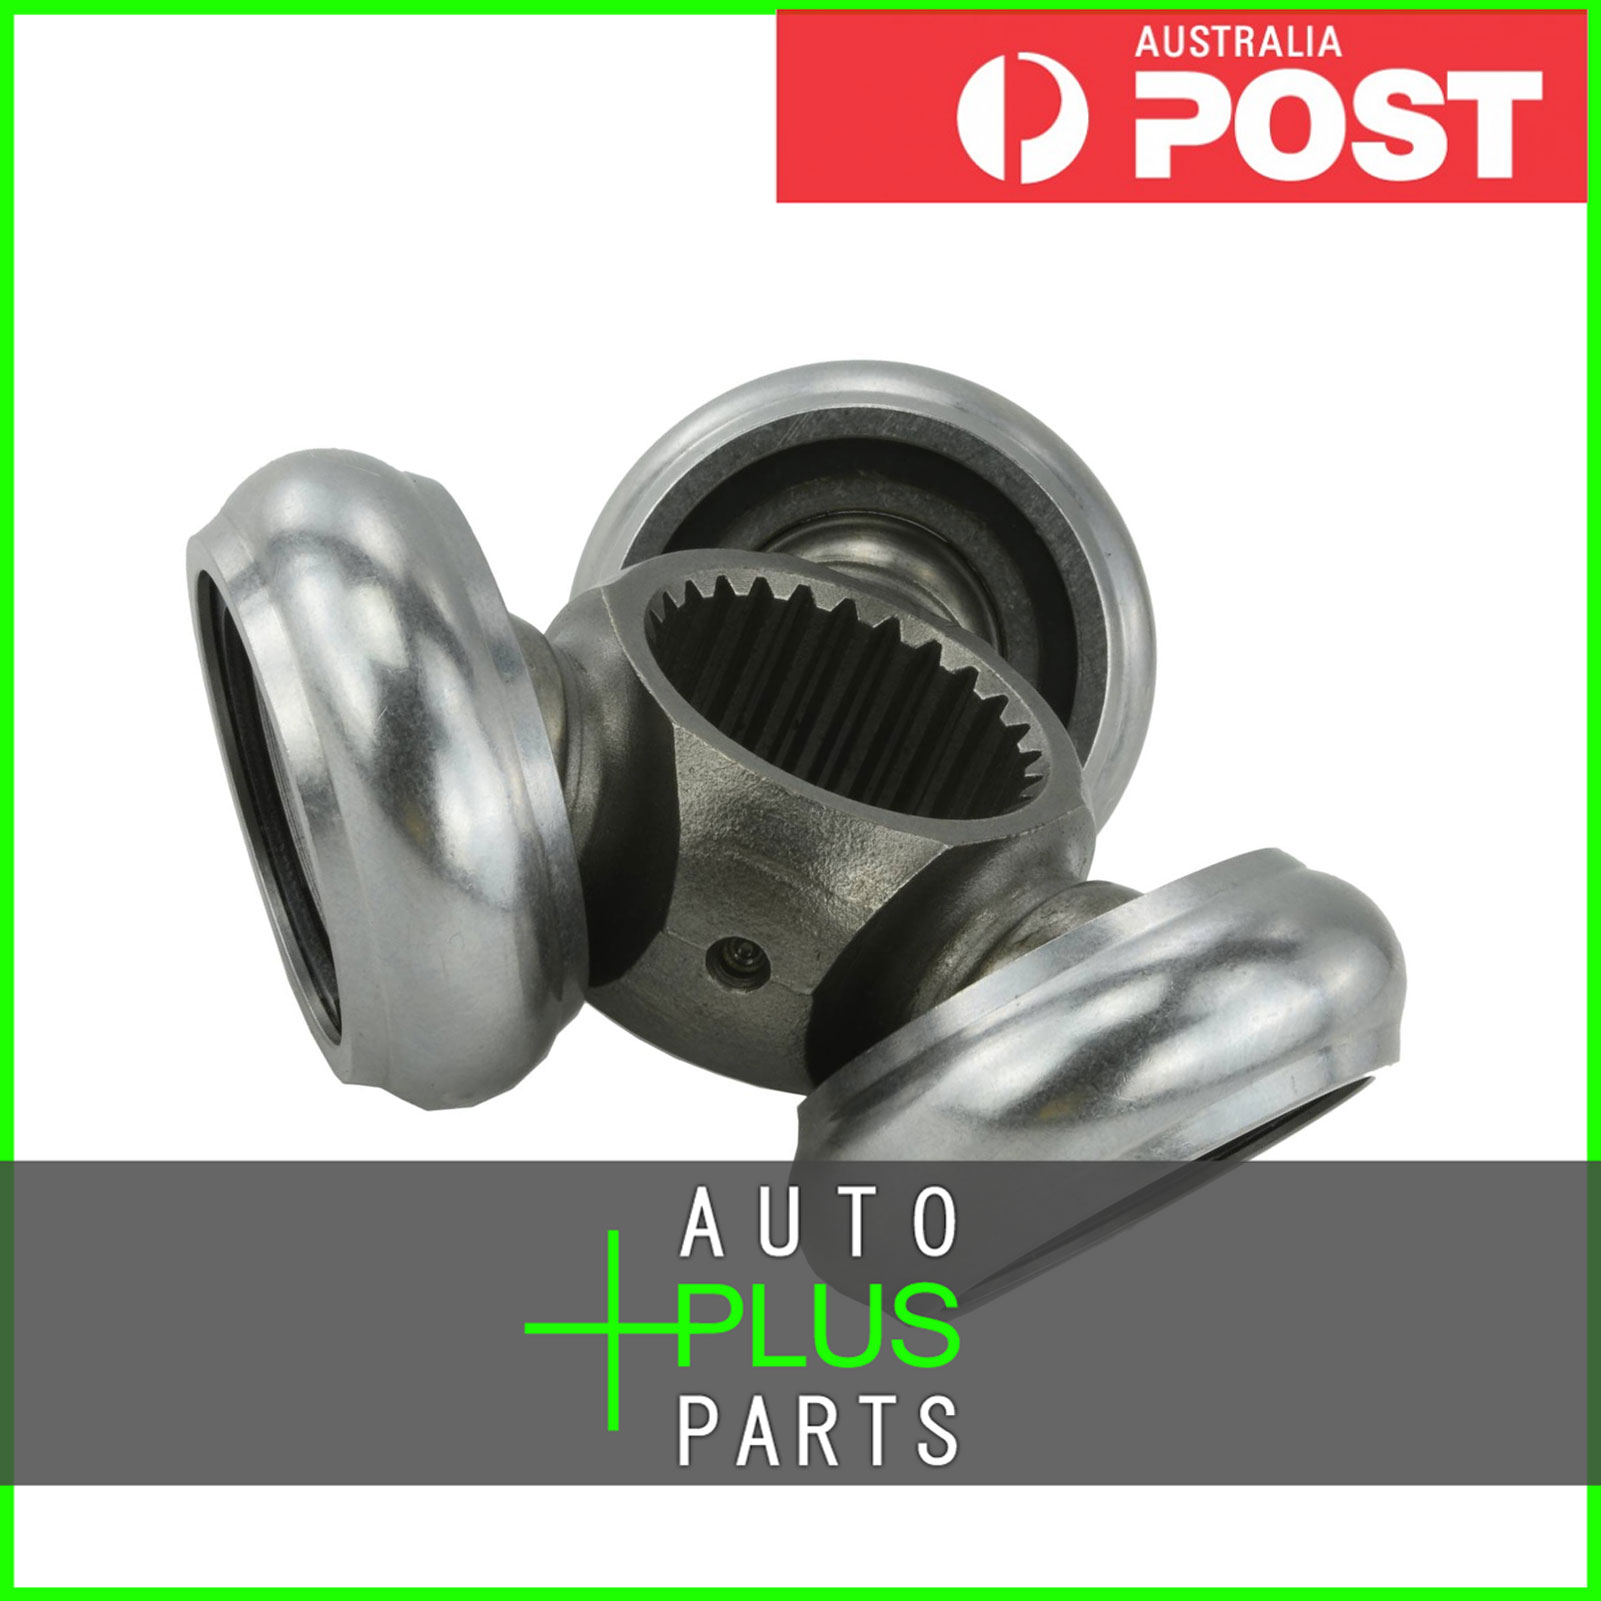 Fits TOYOTA SOLARA MCV31 2003-2008 - Spider Assembly Slide Joint 26X45 Product Photo